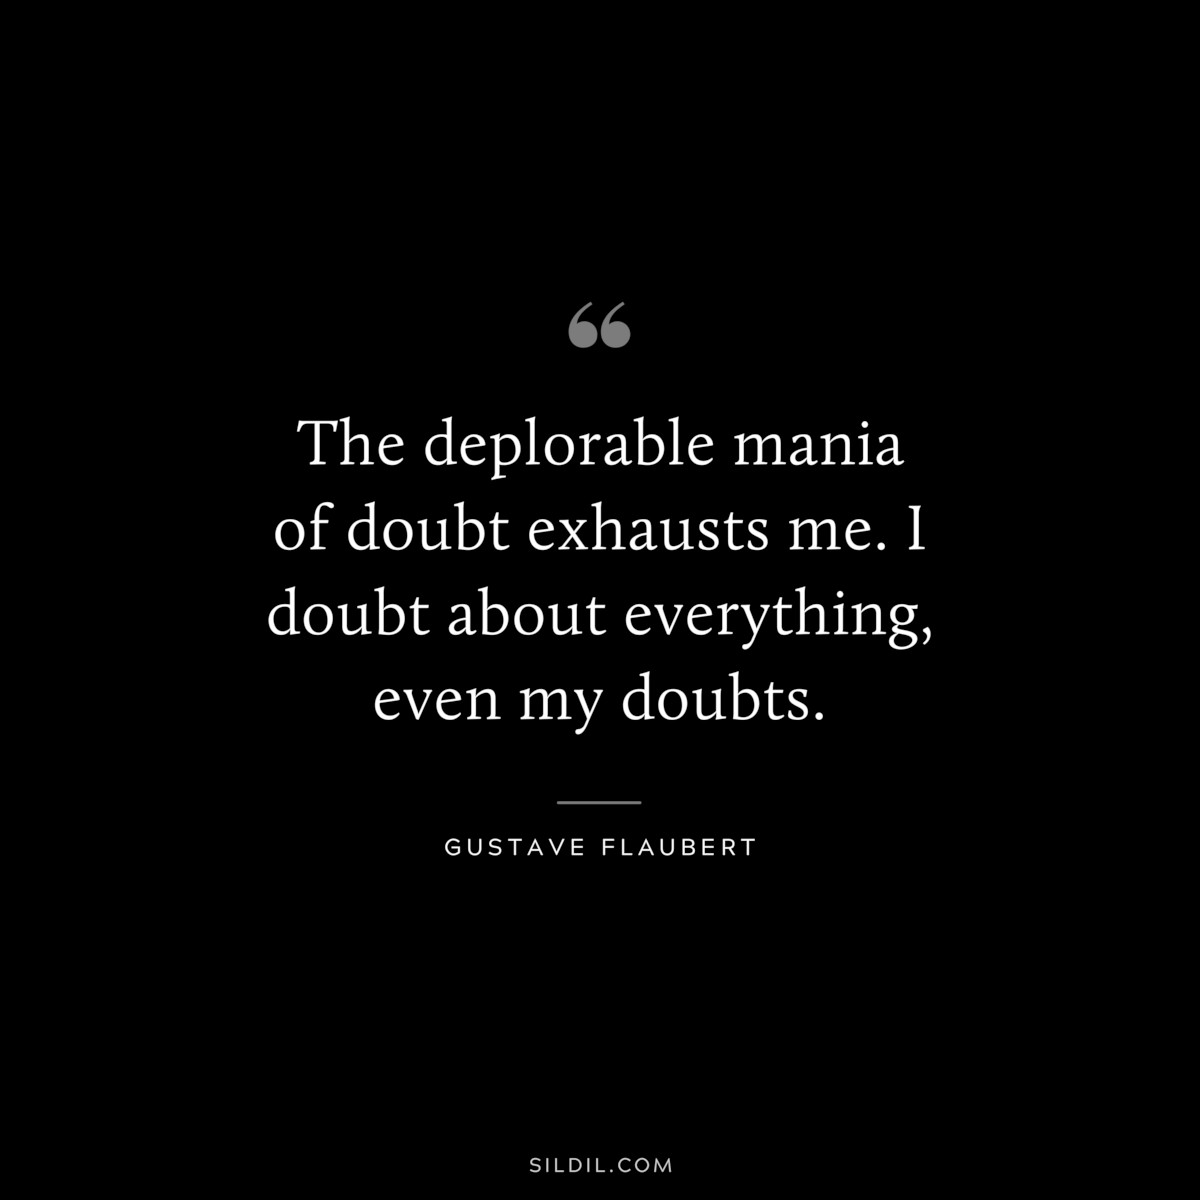 The deplorable mania of doubt exhausts me. I doubt about everything, even my doubts. ― Gustave Flaubert